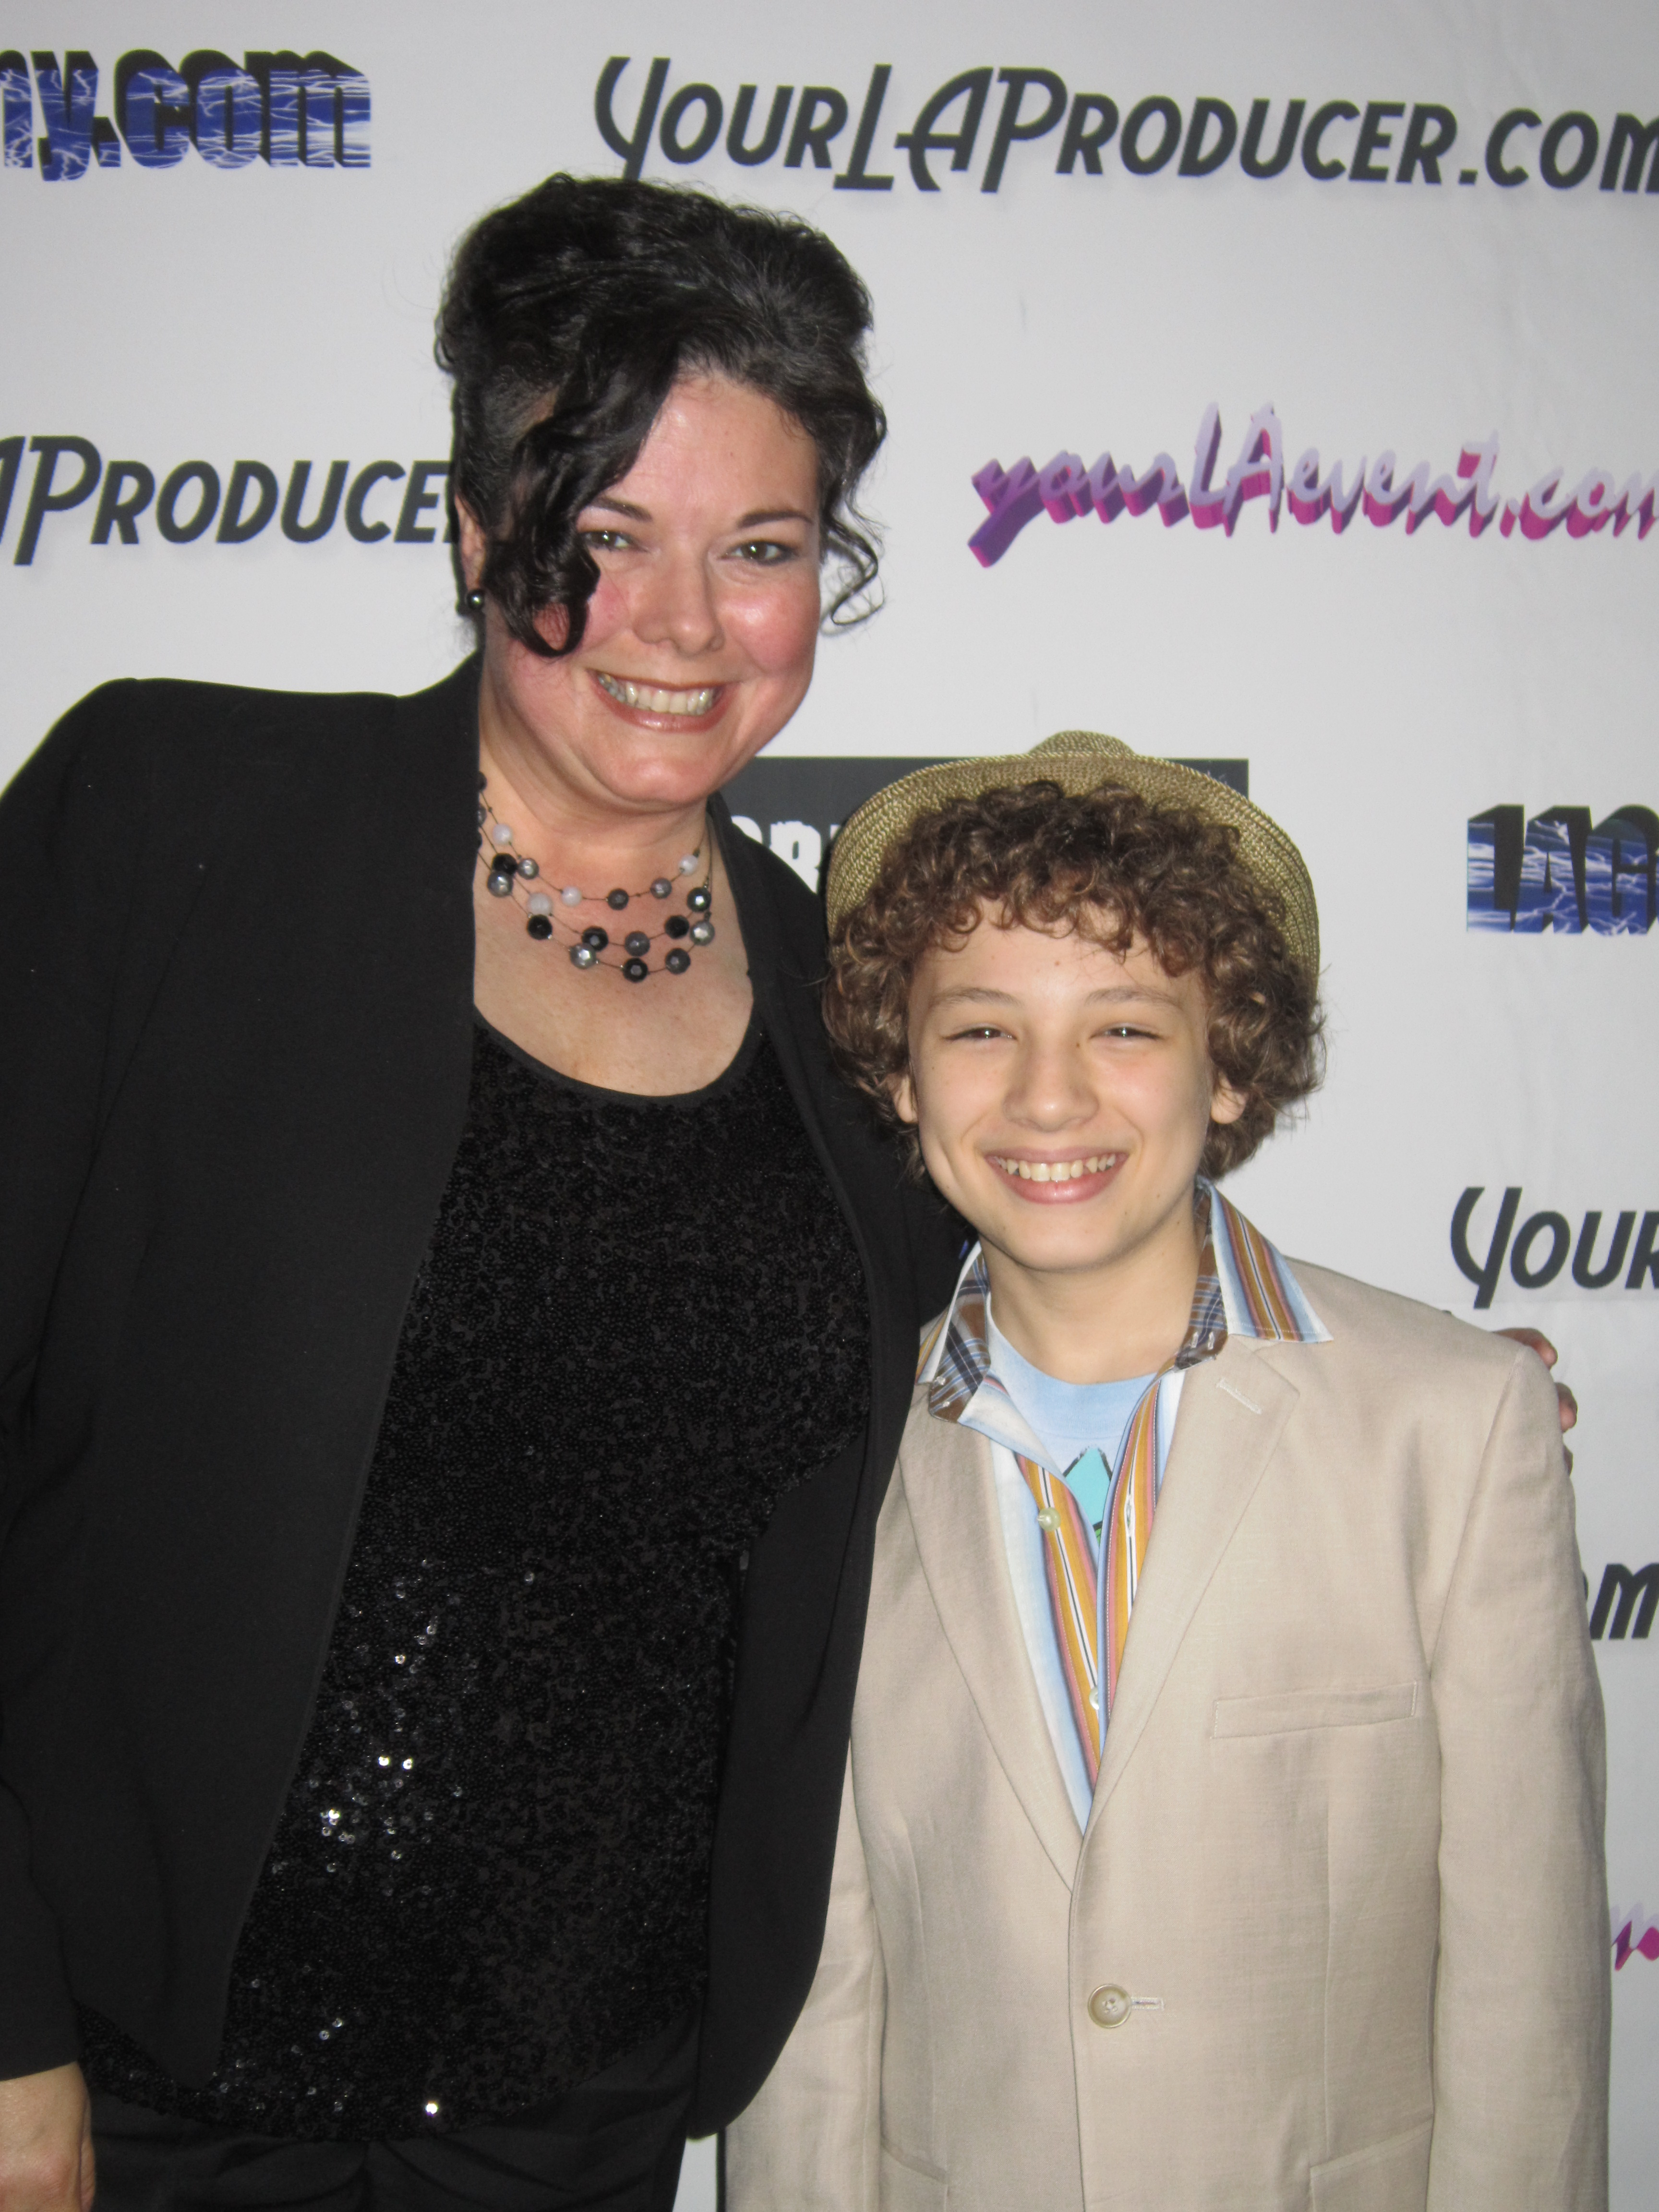 Maxim with Manager Julie Abrams, of DreamScope Entertainment